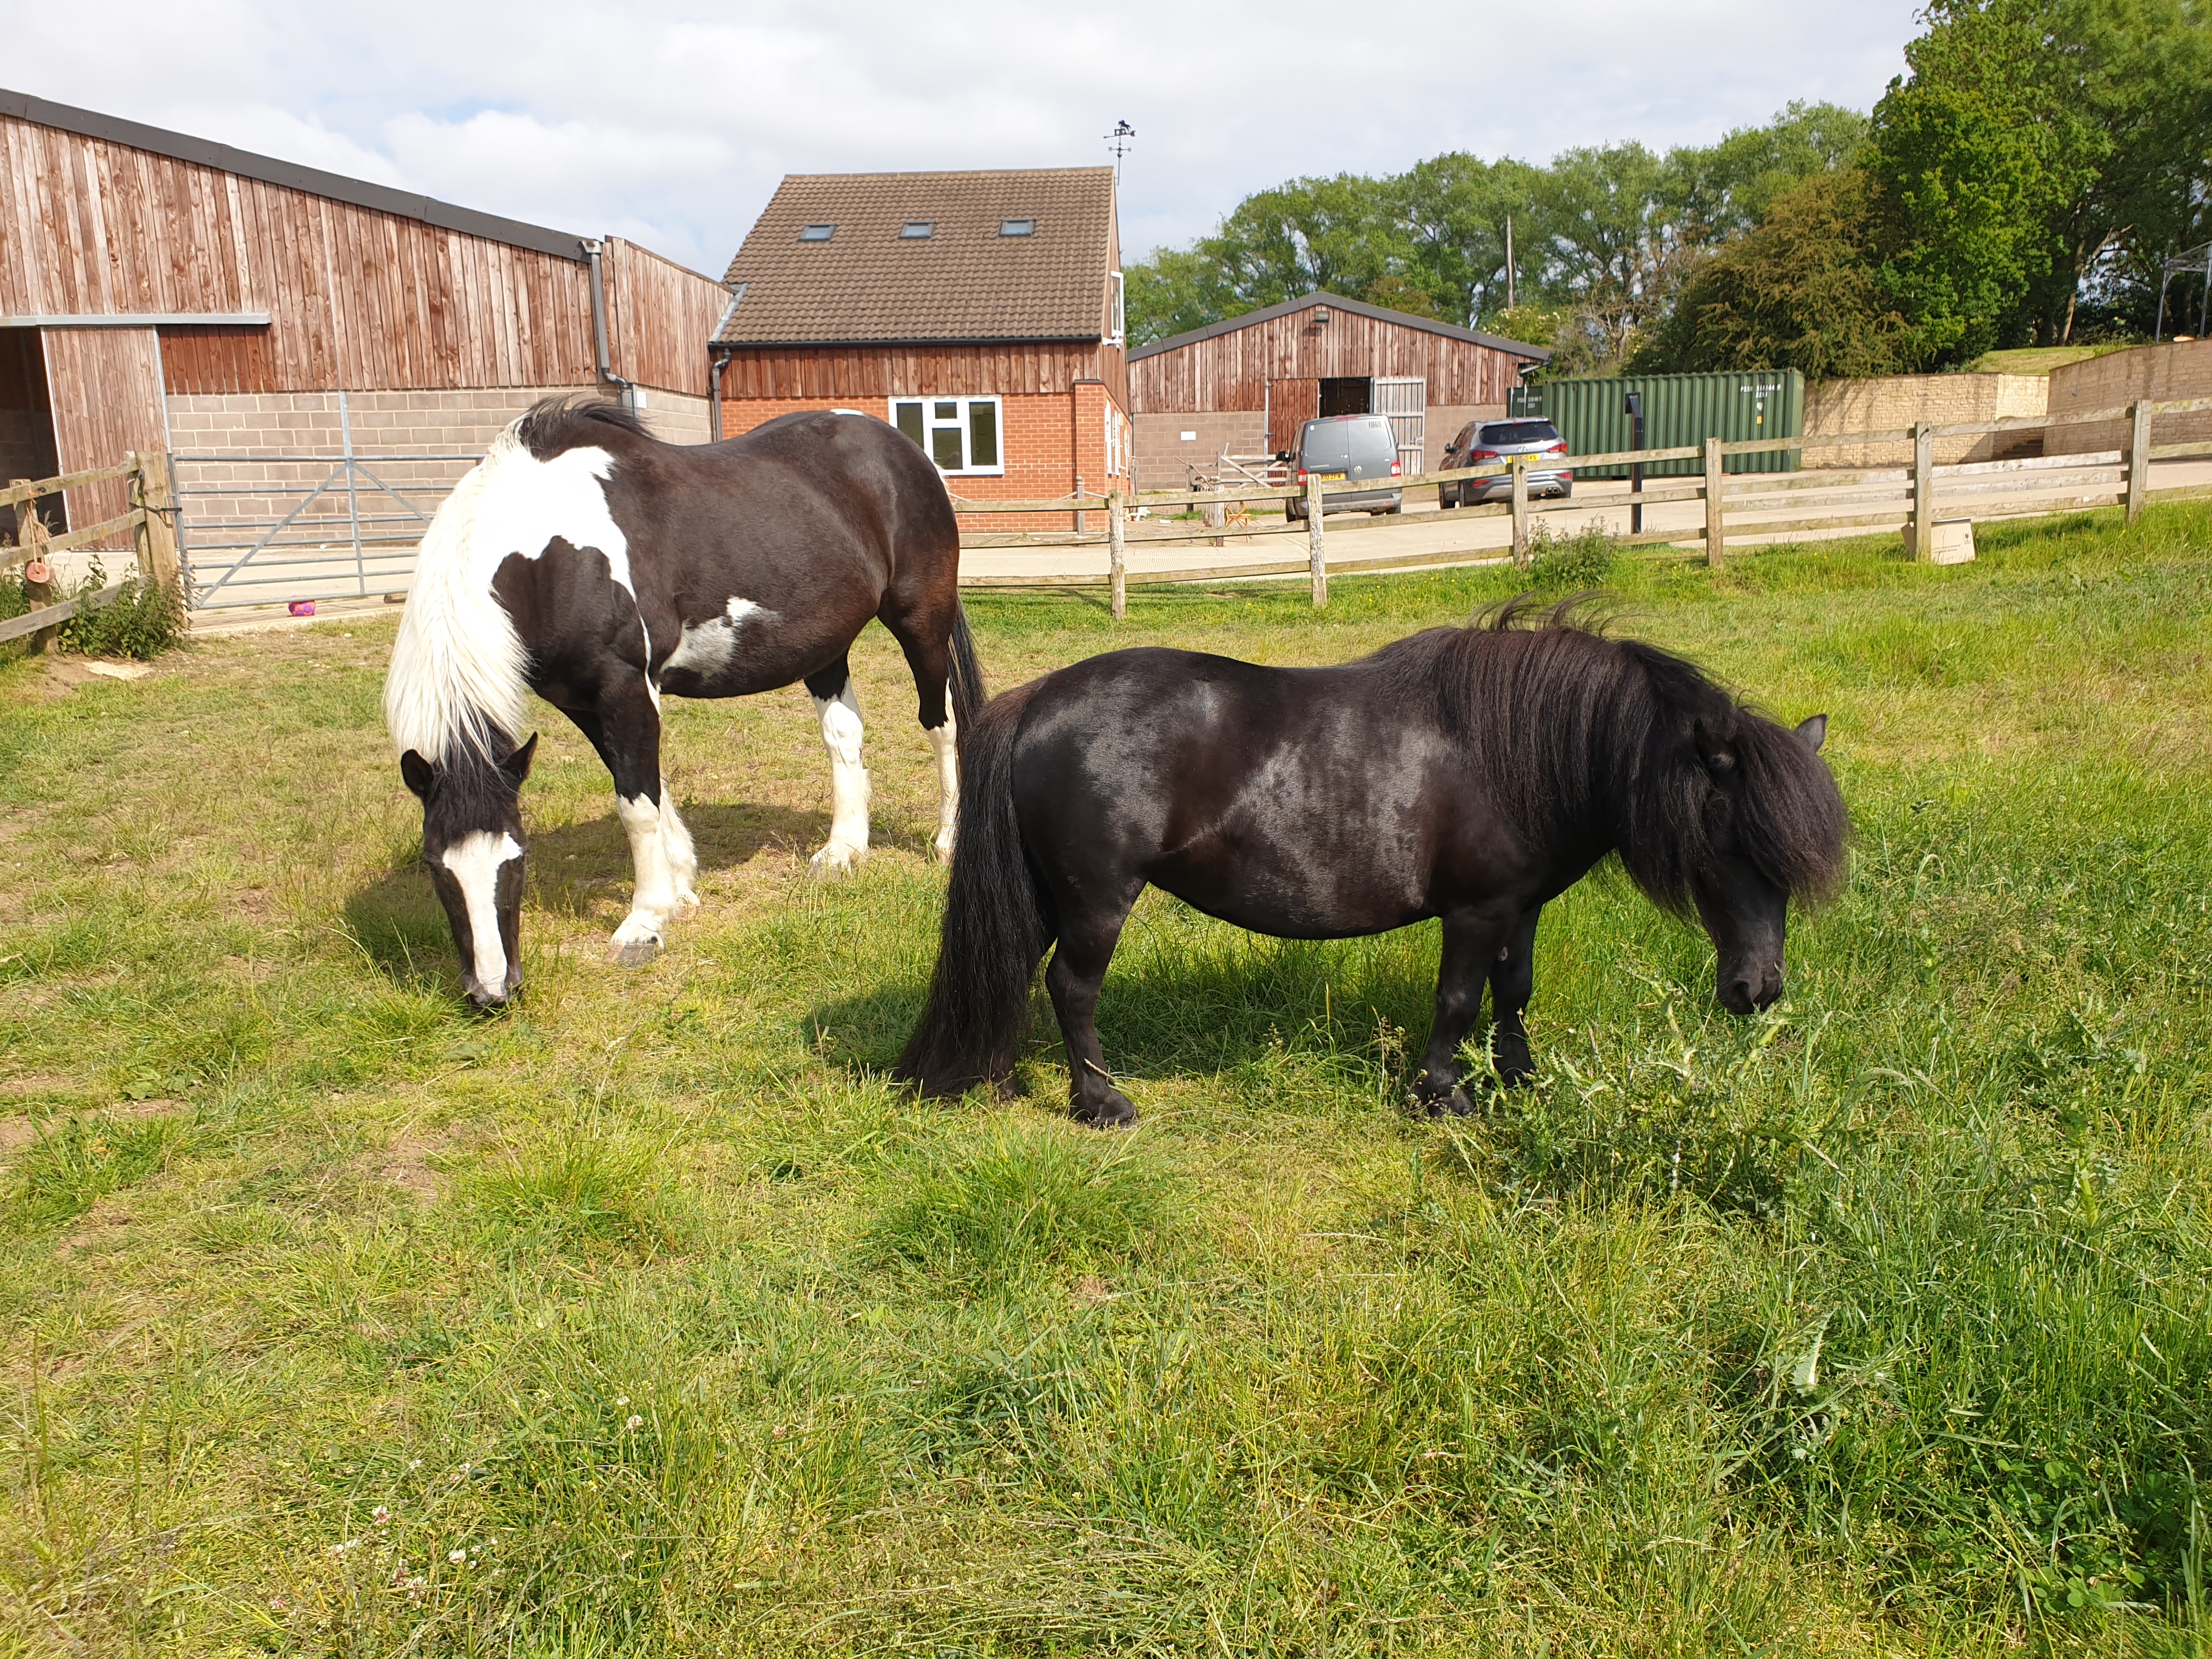 The Not-So-Secret Diary of Diva the Shetland Pony - Not Quite as Planned